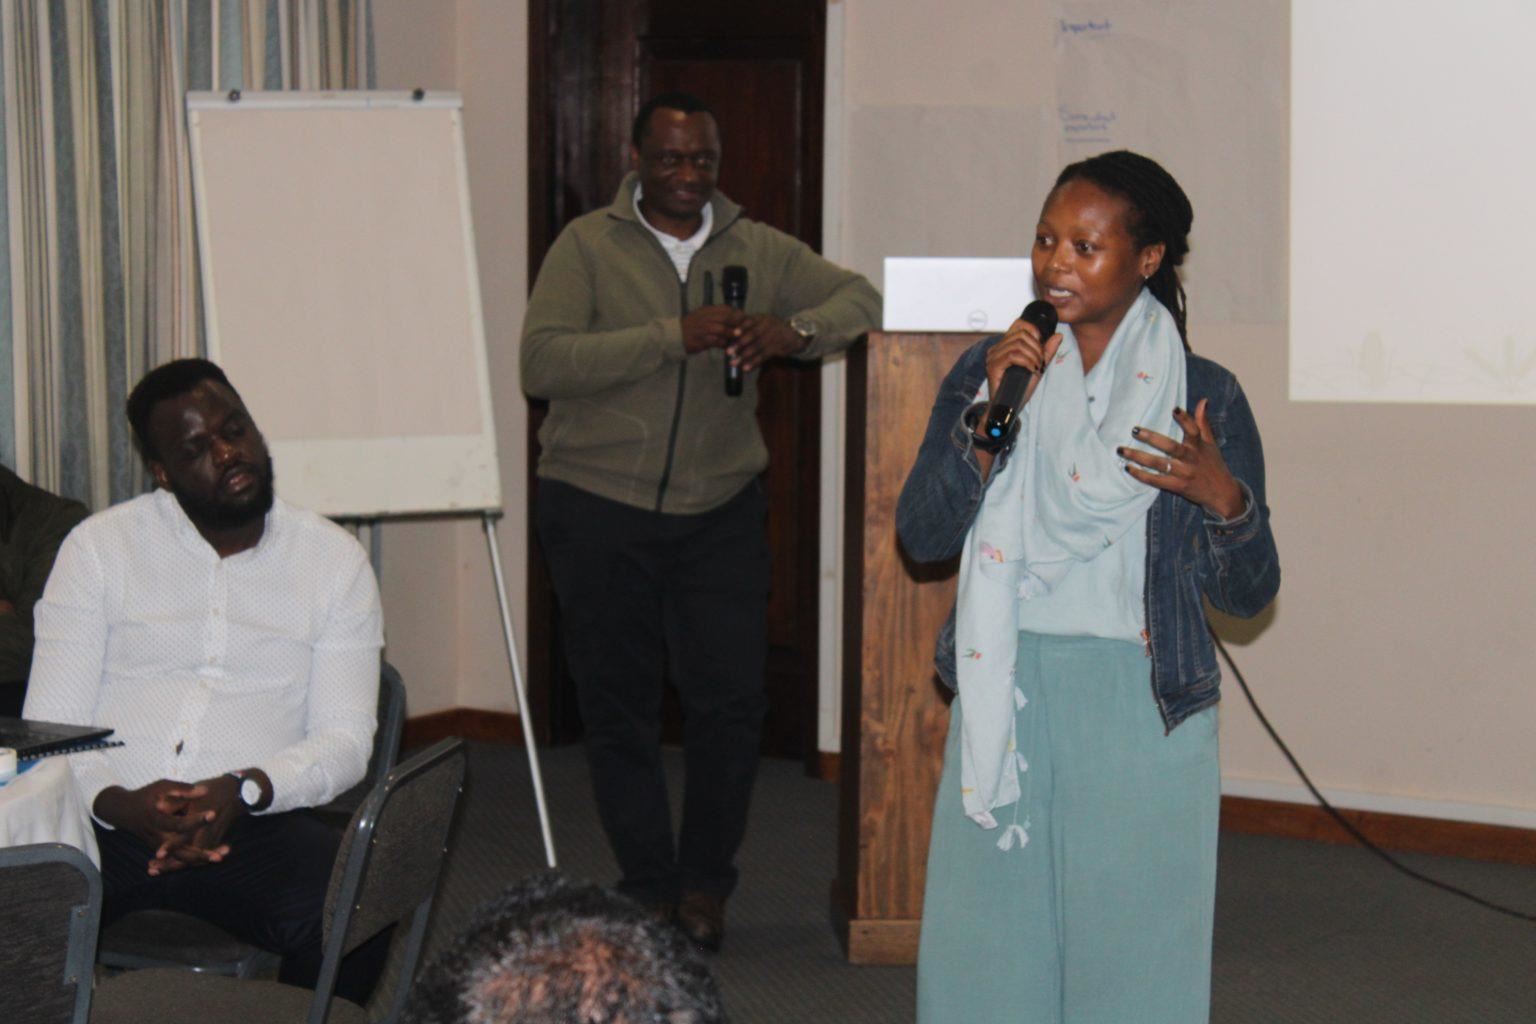 Vimbayi Chimonyo from CIMMYT making opening remarks at the workshop.